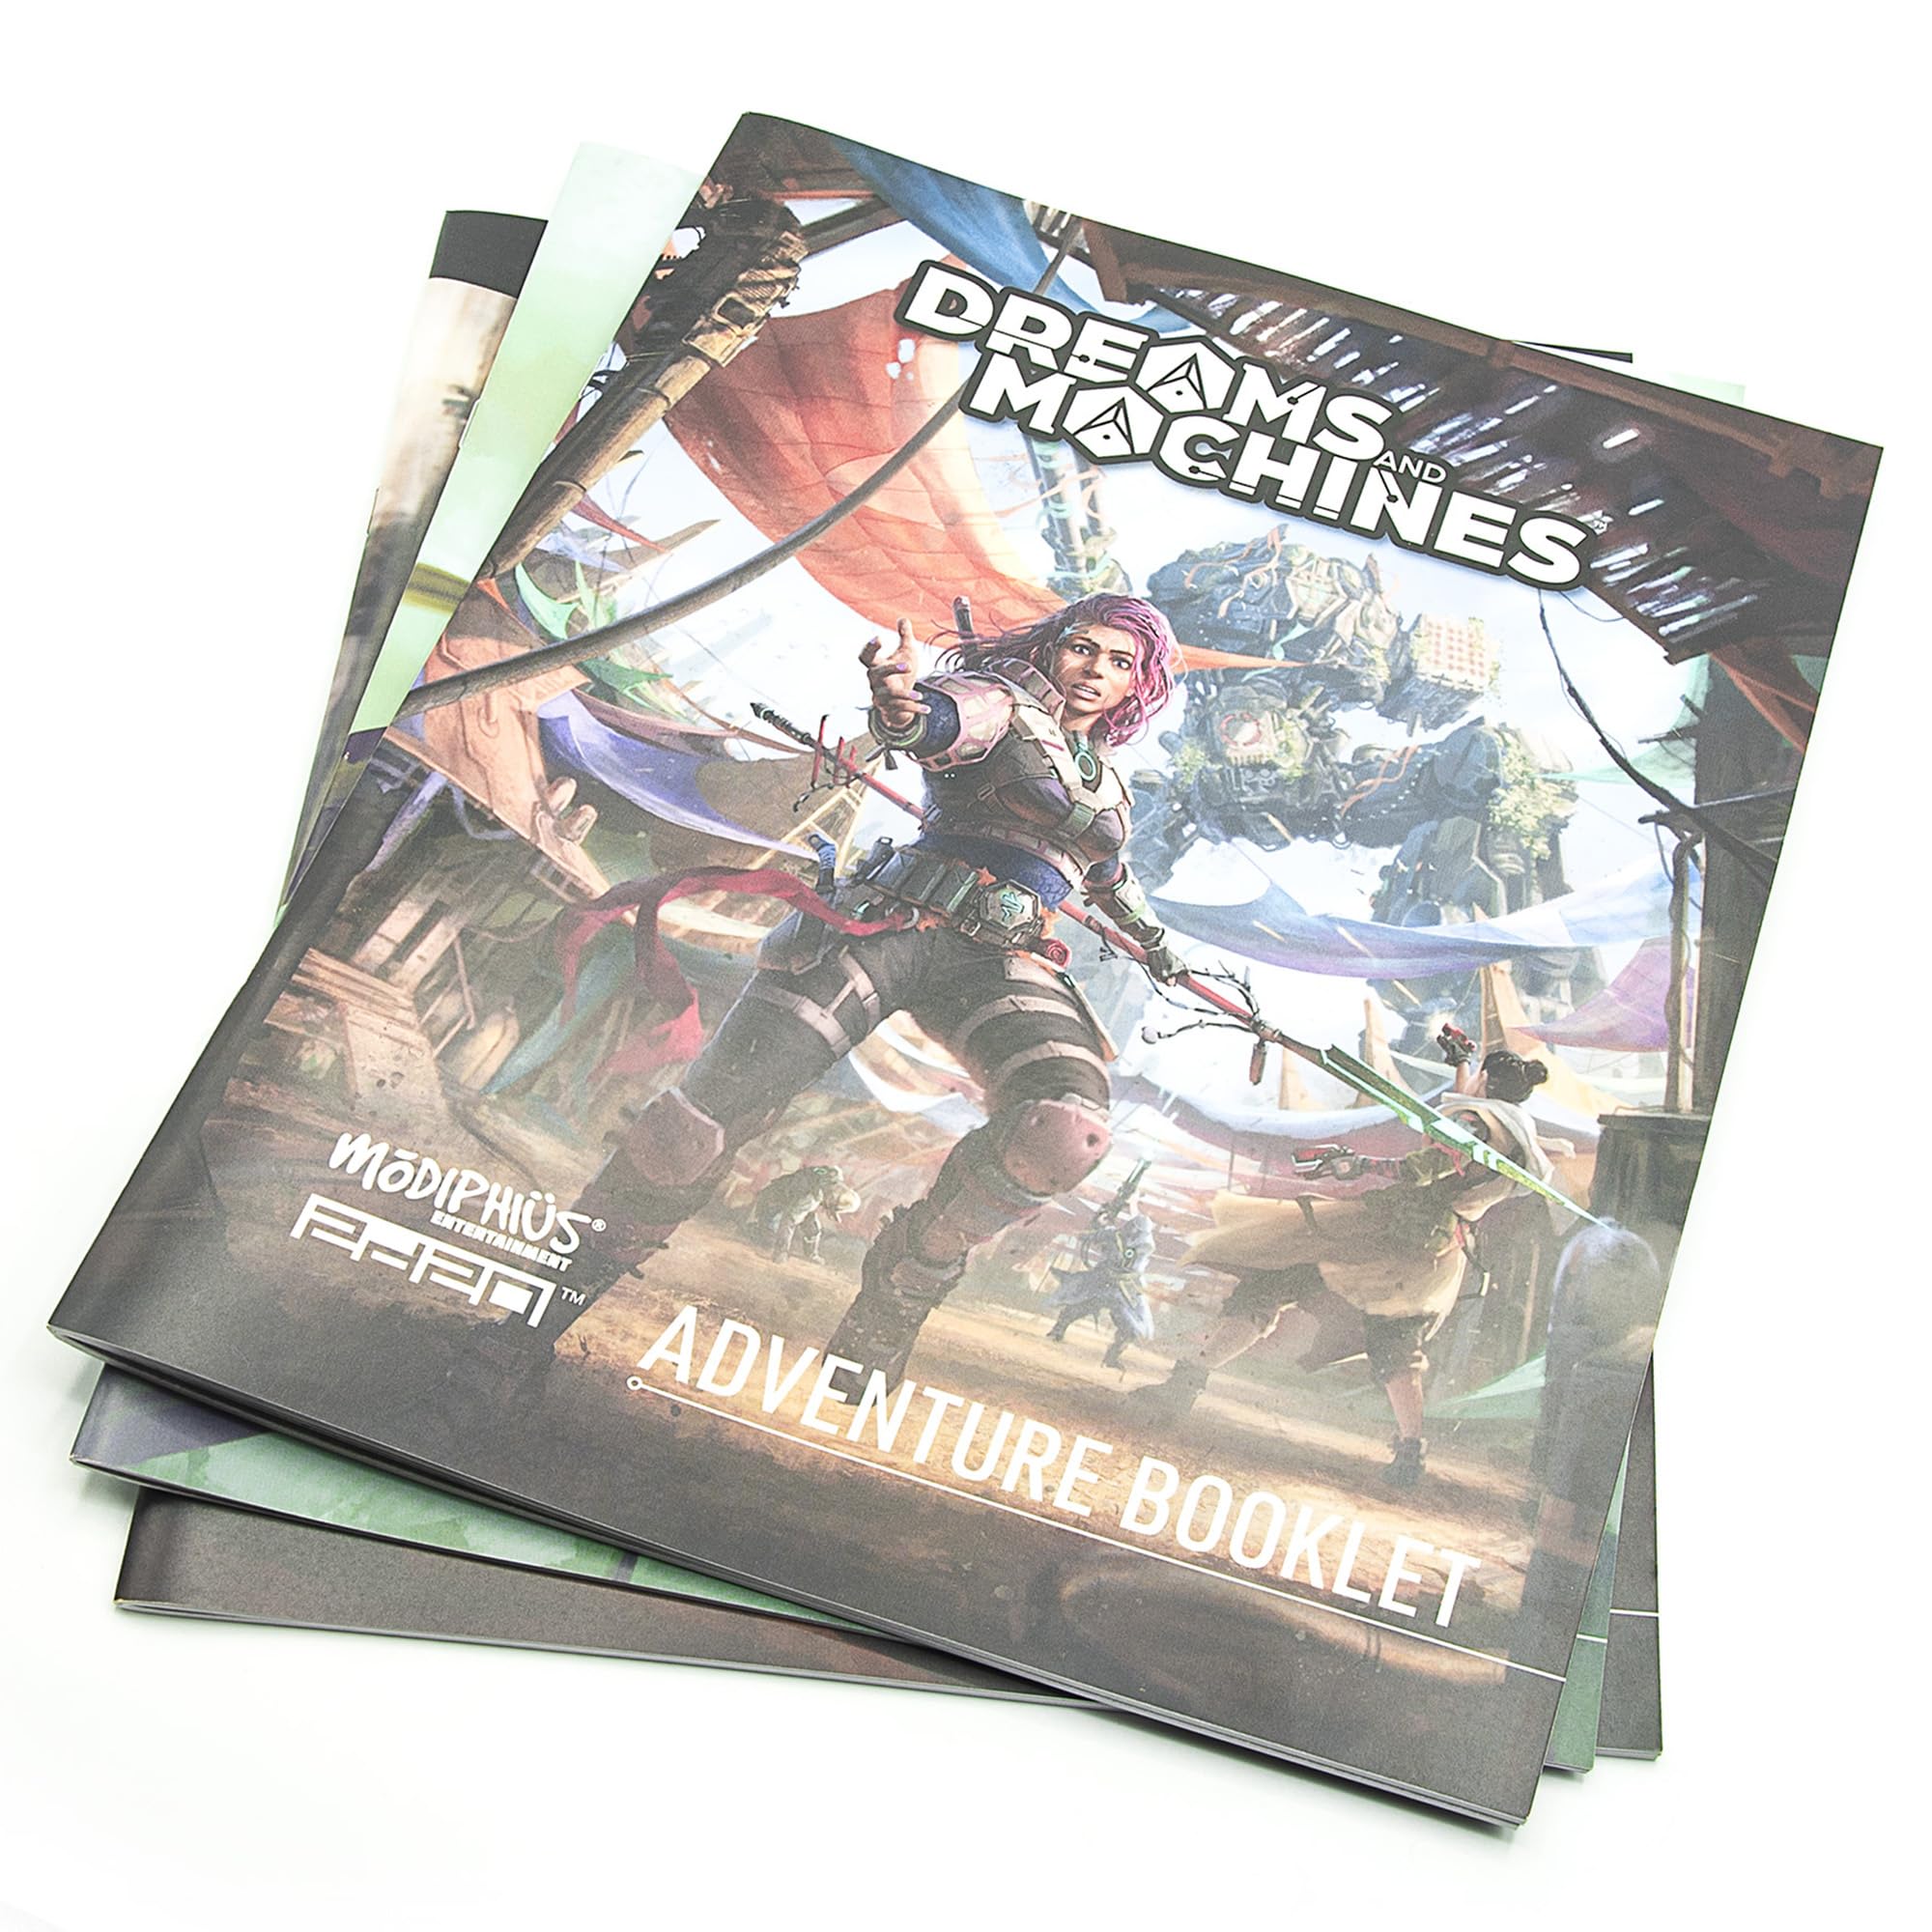 Modiphius: Dreams and Machines: RPG Starter Set to Play & Explore The World of Evera Prime, Booklet, Dice, Cards & More